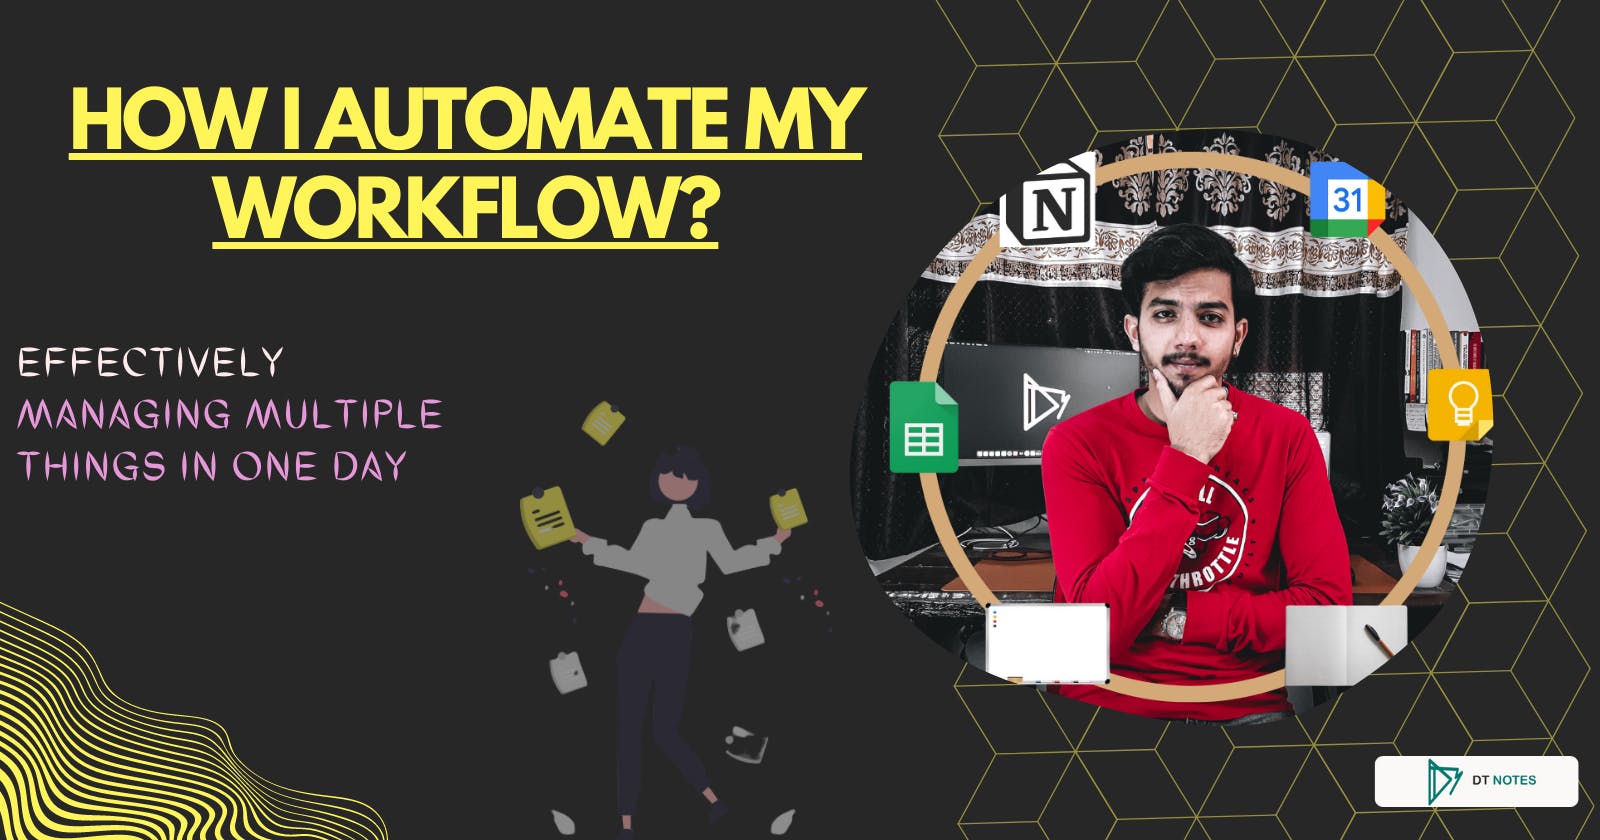 How I Automate My Workflow?